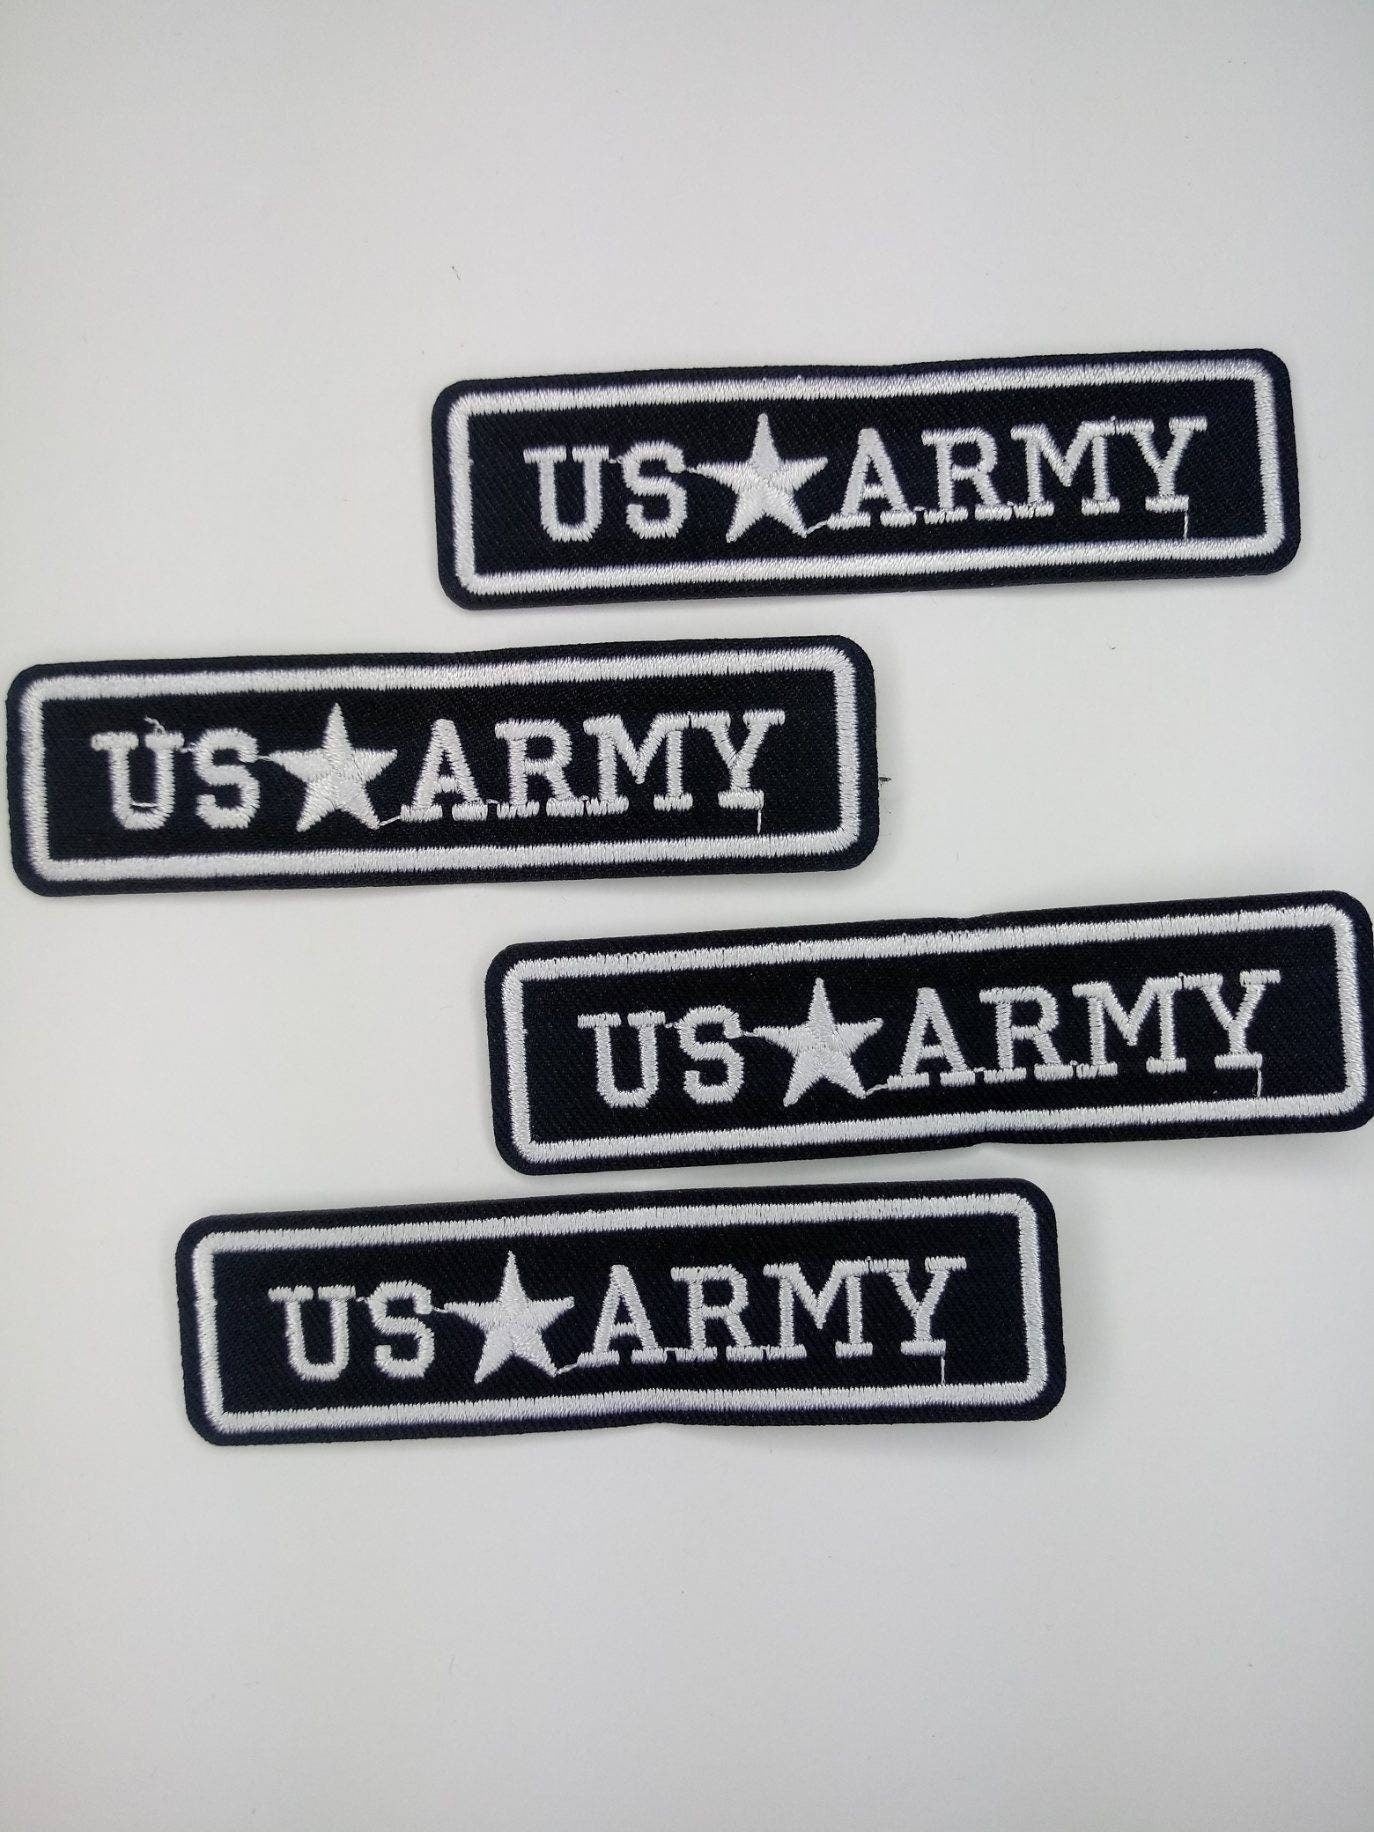 Military Emblem, Black and White "US ARMY" with a star Embroidery Patch, Size 3"x1", Cool Iron-on Patch, Applique for Clothing & Accessories